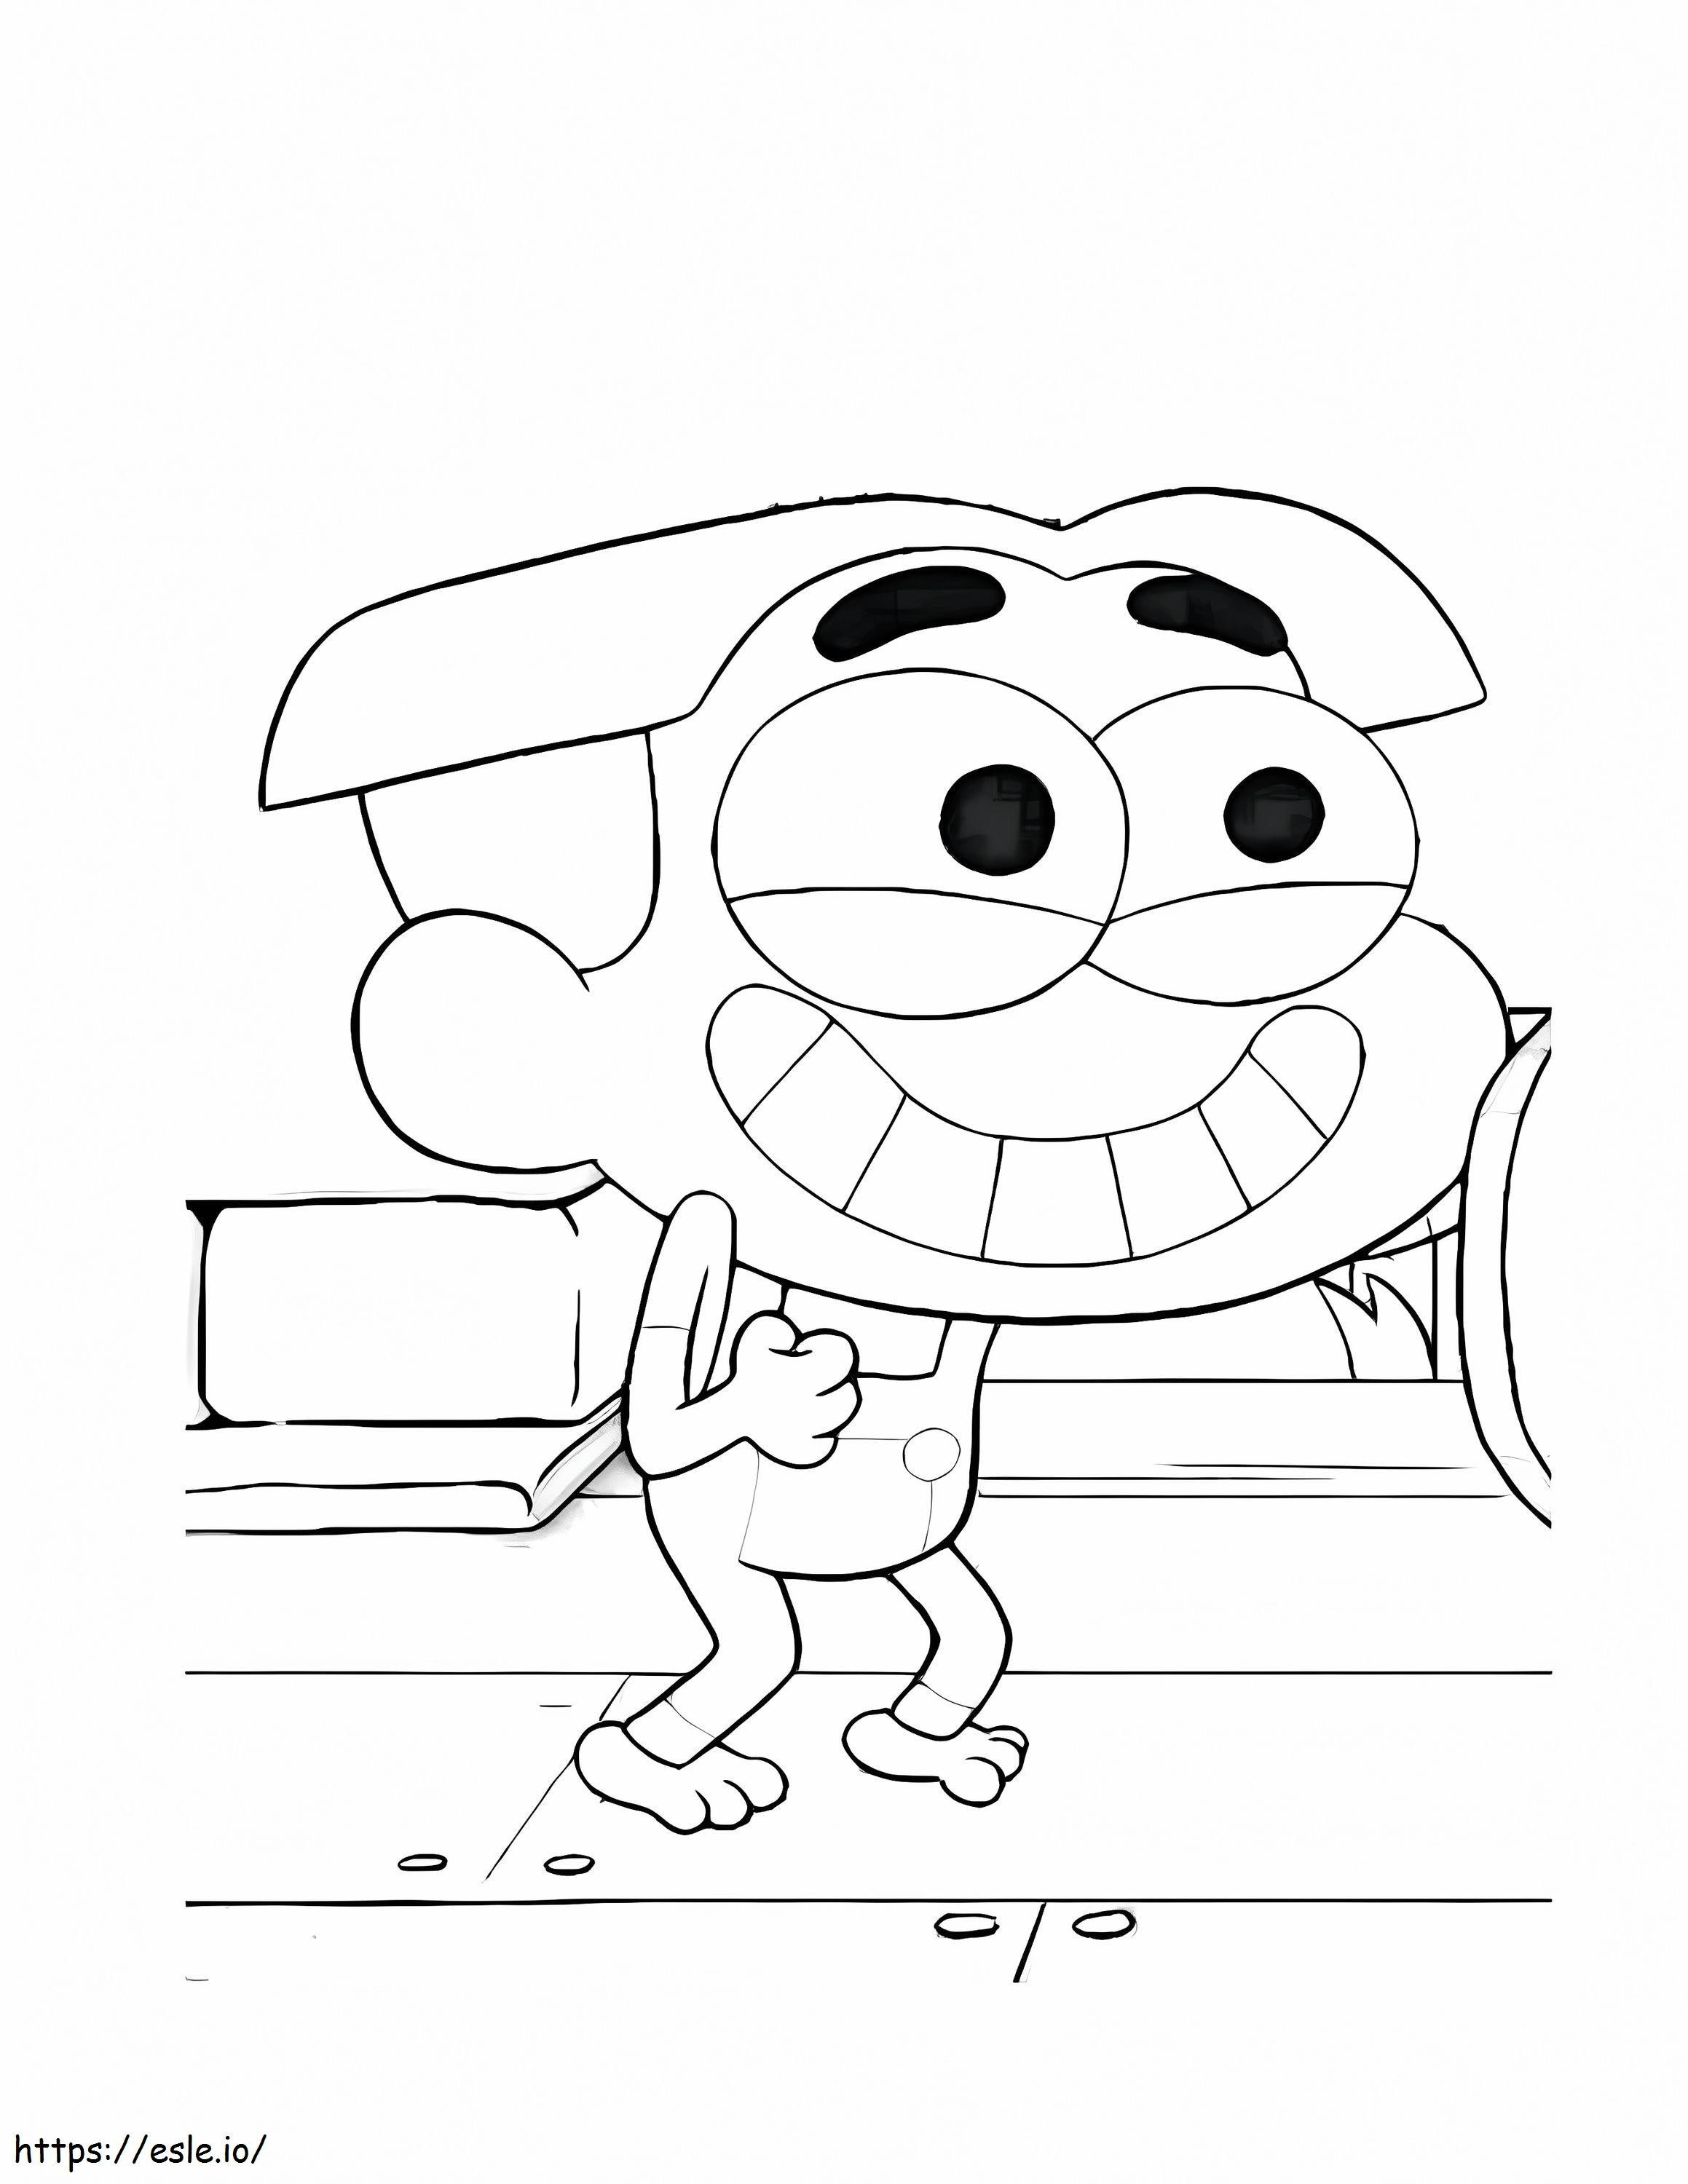 Cricket Green coloring page